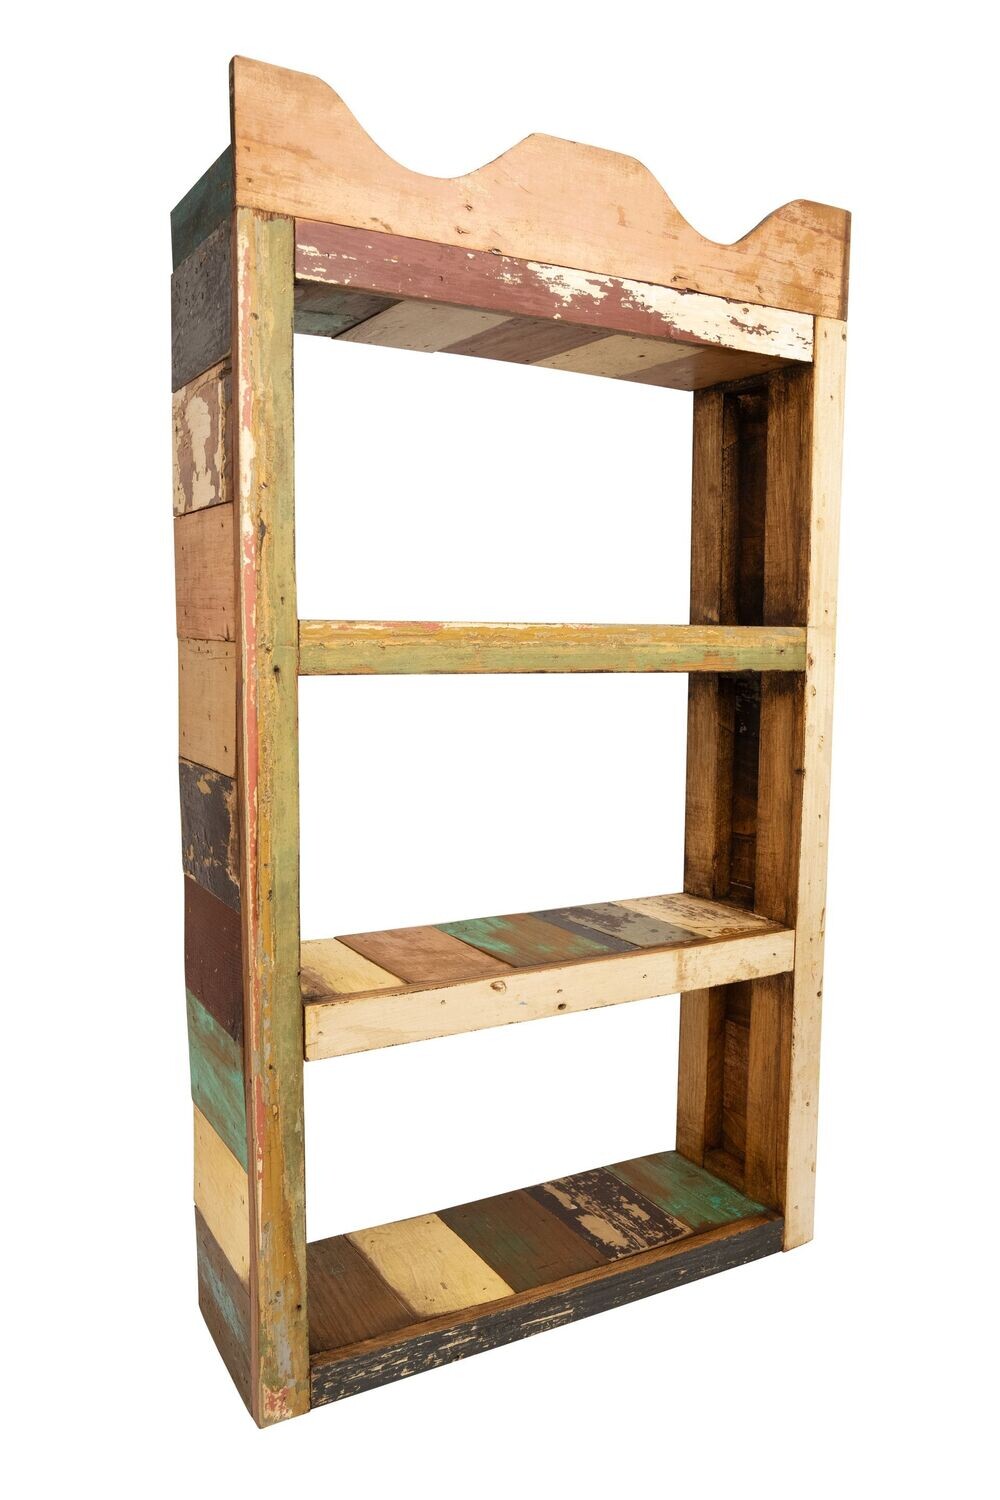 Montrose Reclaimed Wood Wall-Shelf-17Wx5.5Dx30H inches-NEW